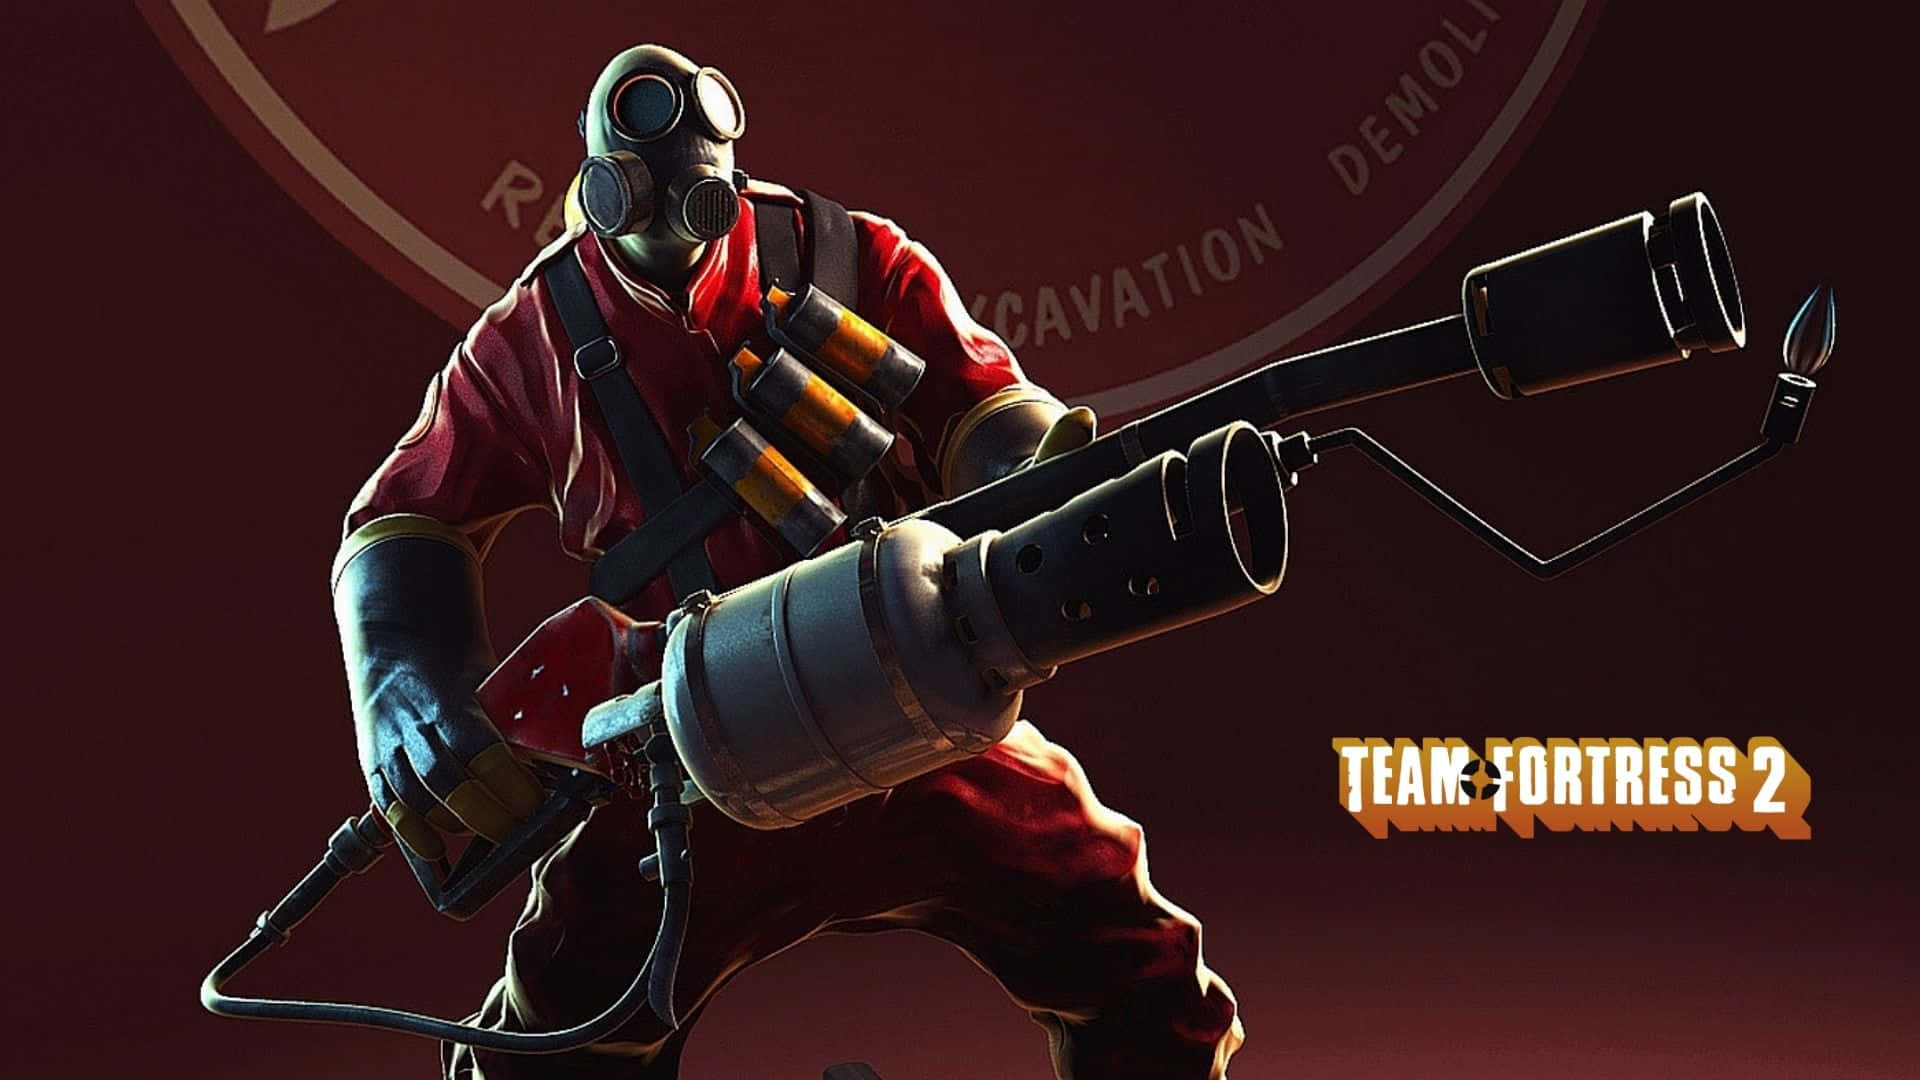 "The 1920x1080 TF2 Background - A Perfect Vintage Look"